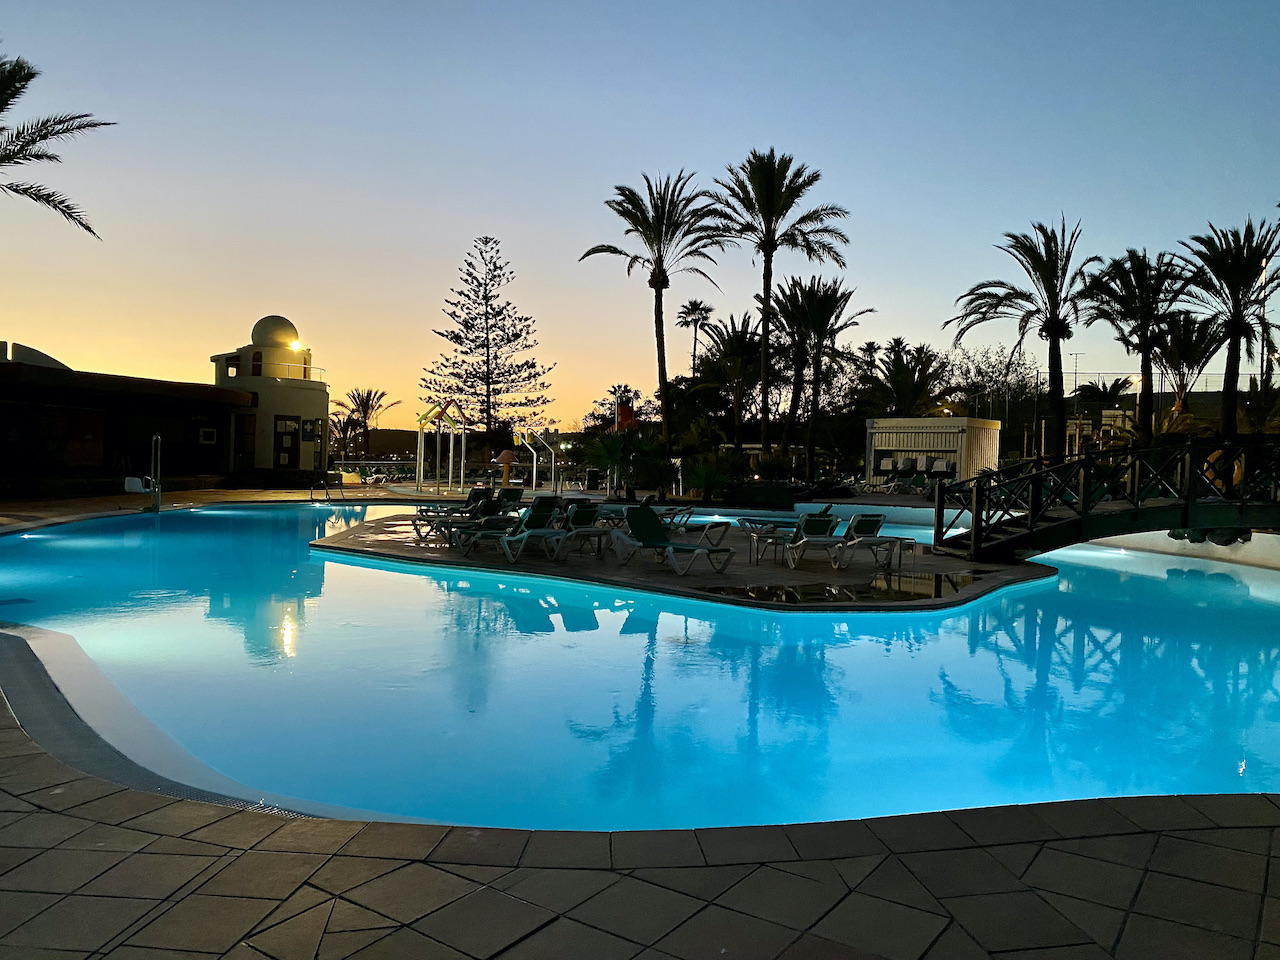 Pool at sunset with palm trees